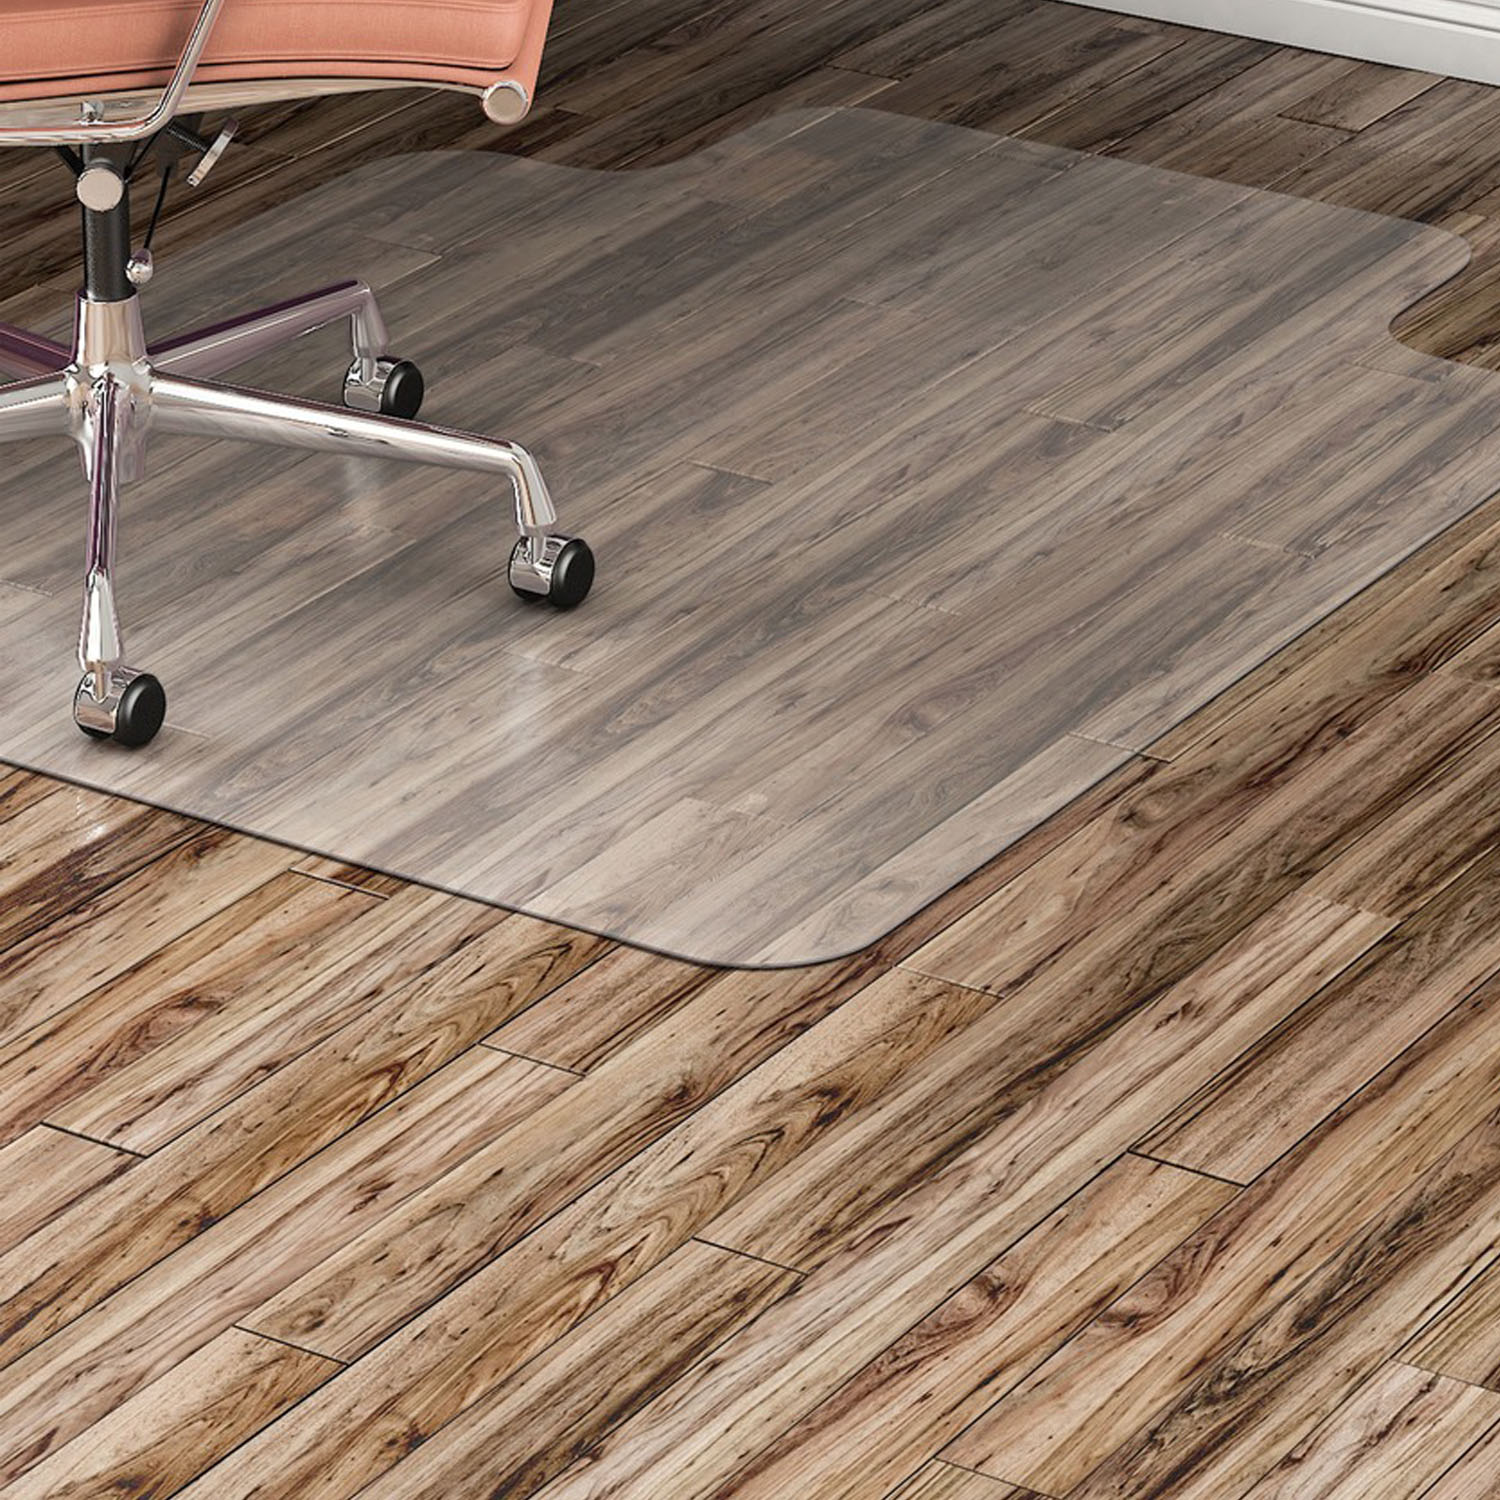 Wooden Floor Tiles Manufacturer And Supplier In India Group Of Metro